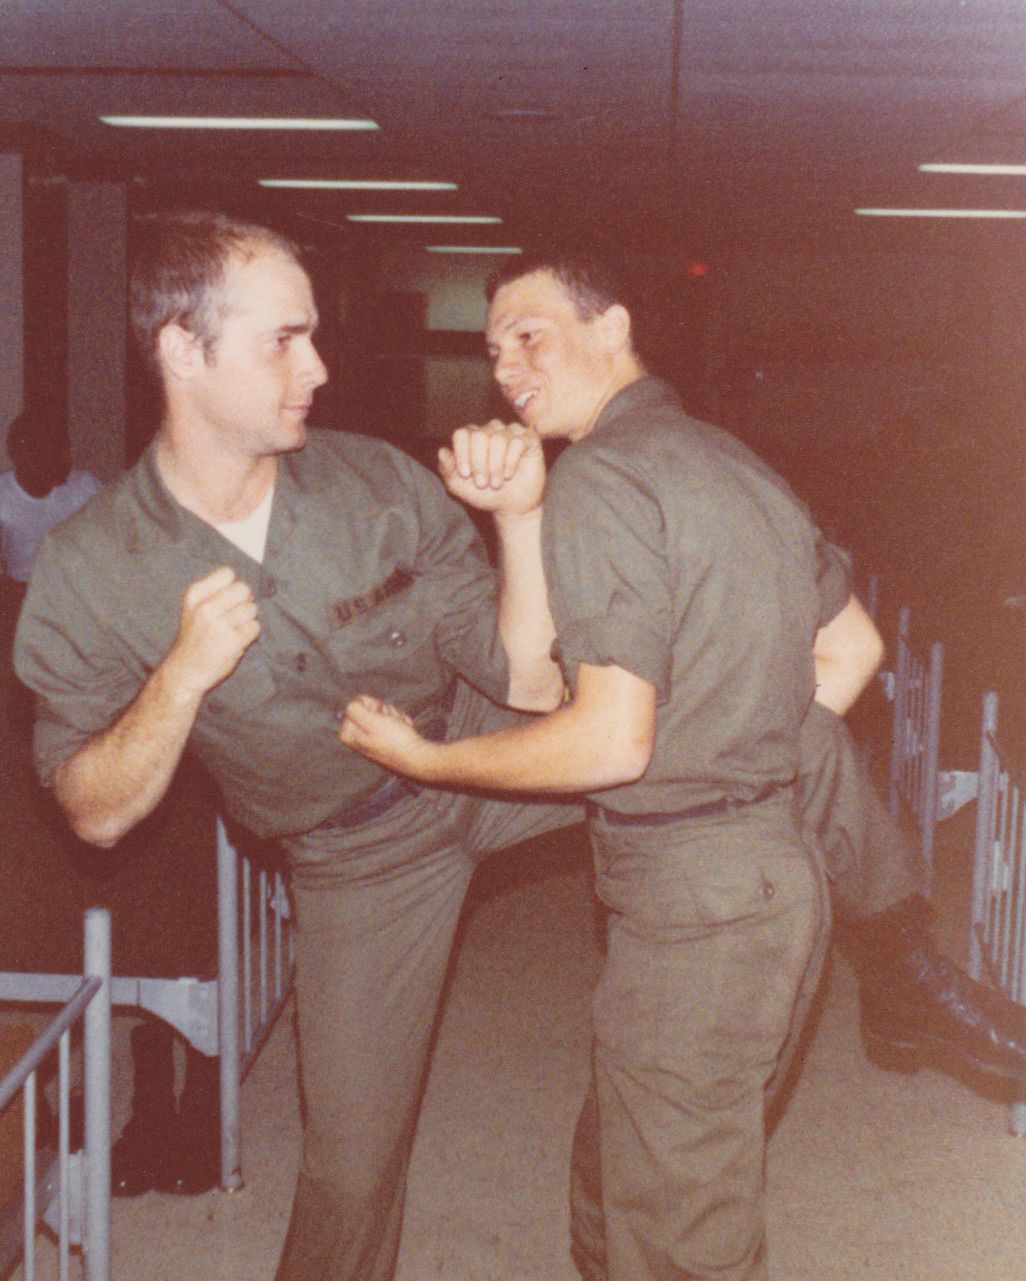 Private Wagner began teaching fellow soldiers in 1980, and he has been teaching self-defense ever since. Here he's training a soldier in Fort Jackson.